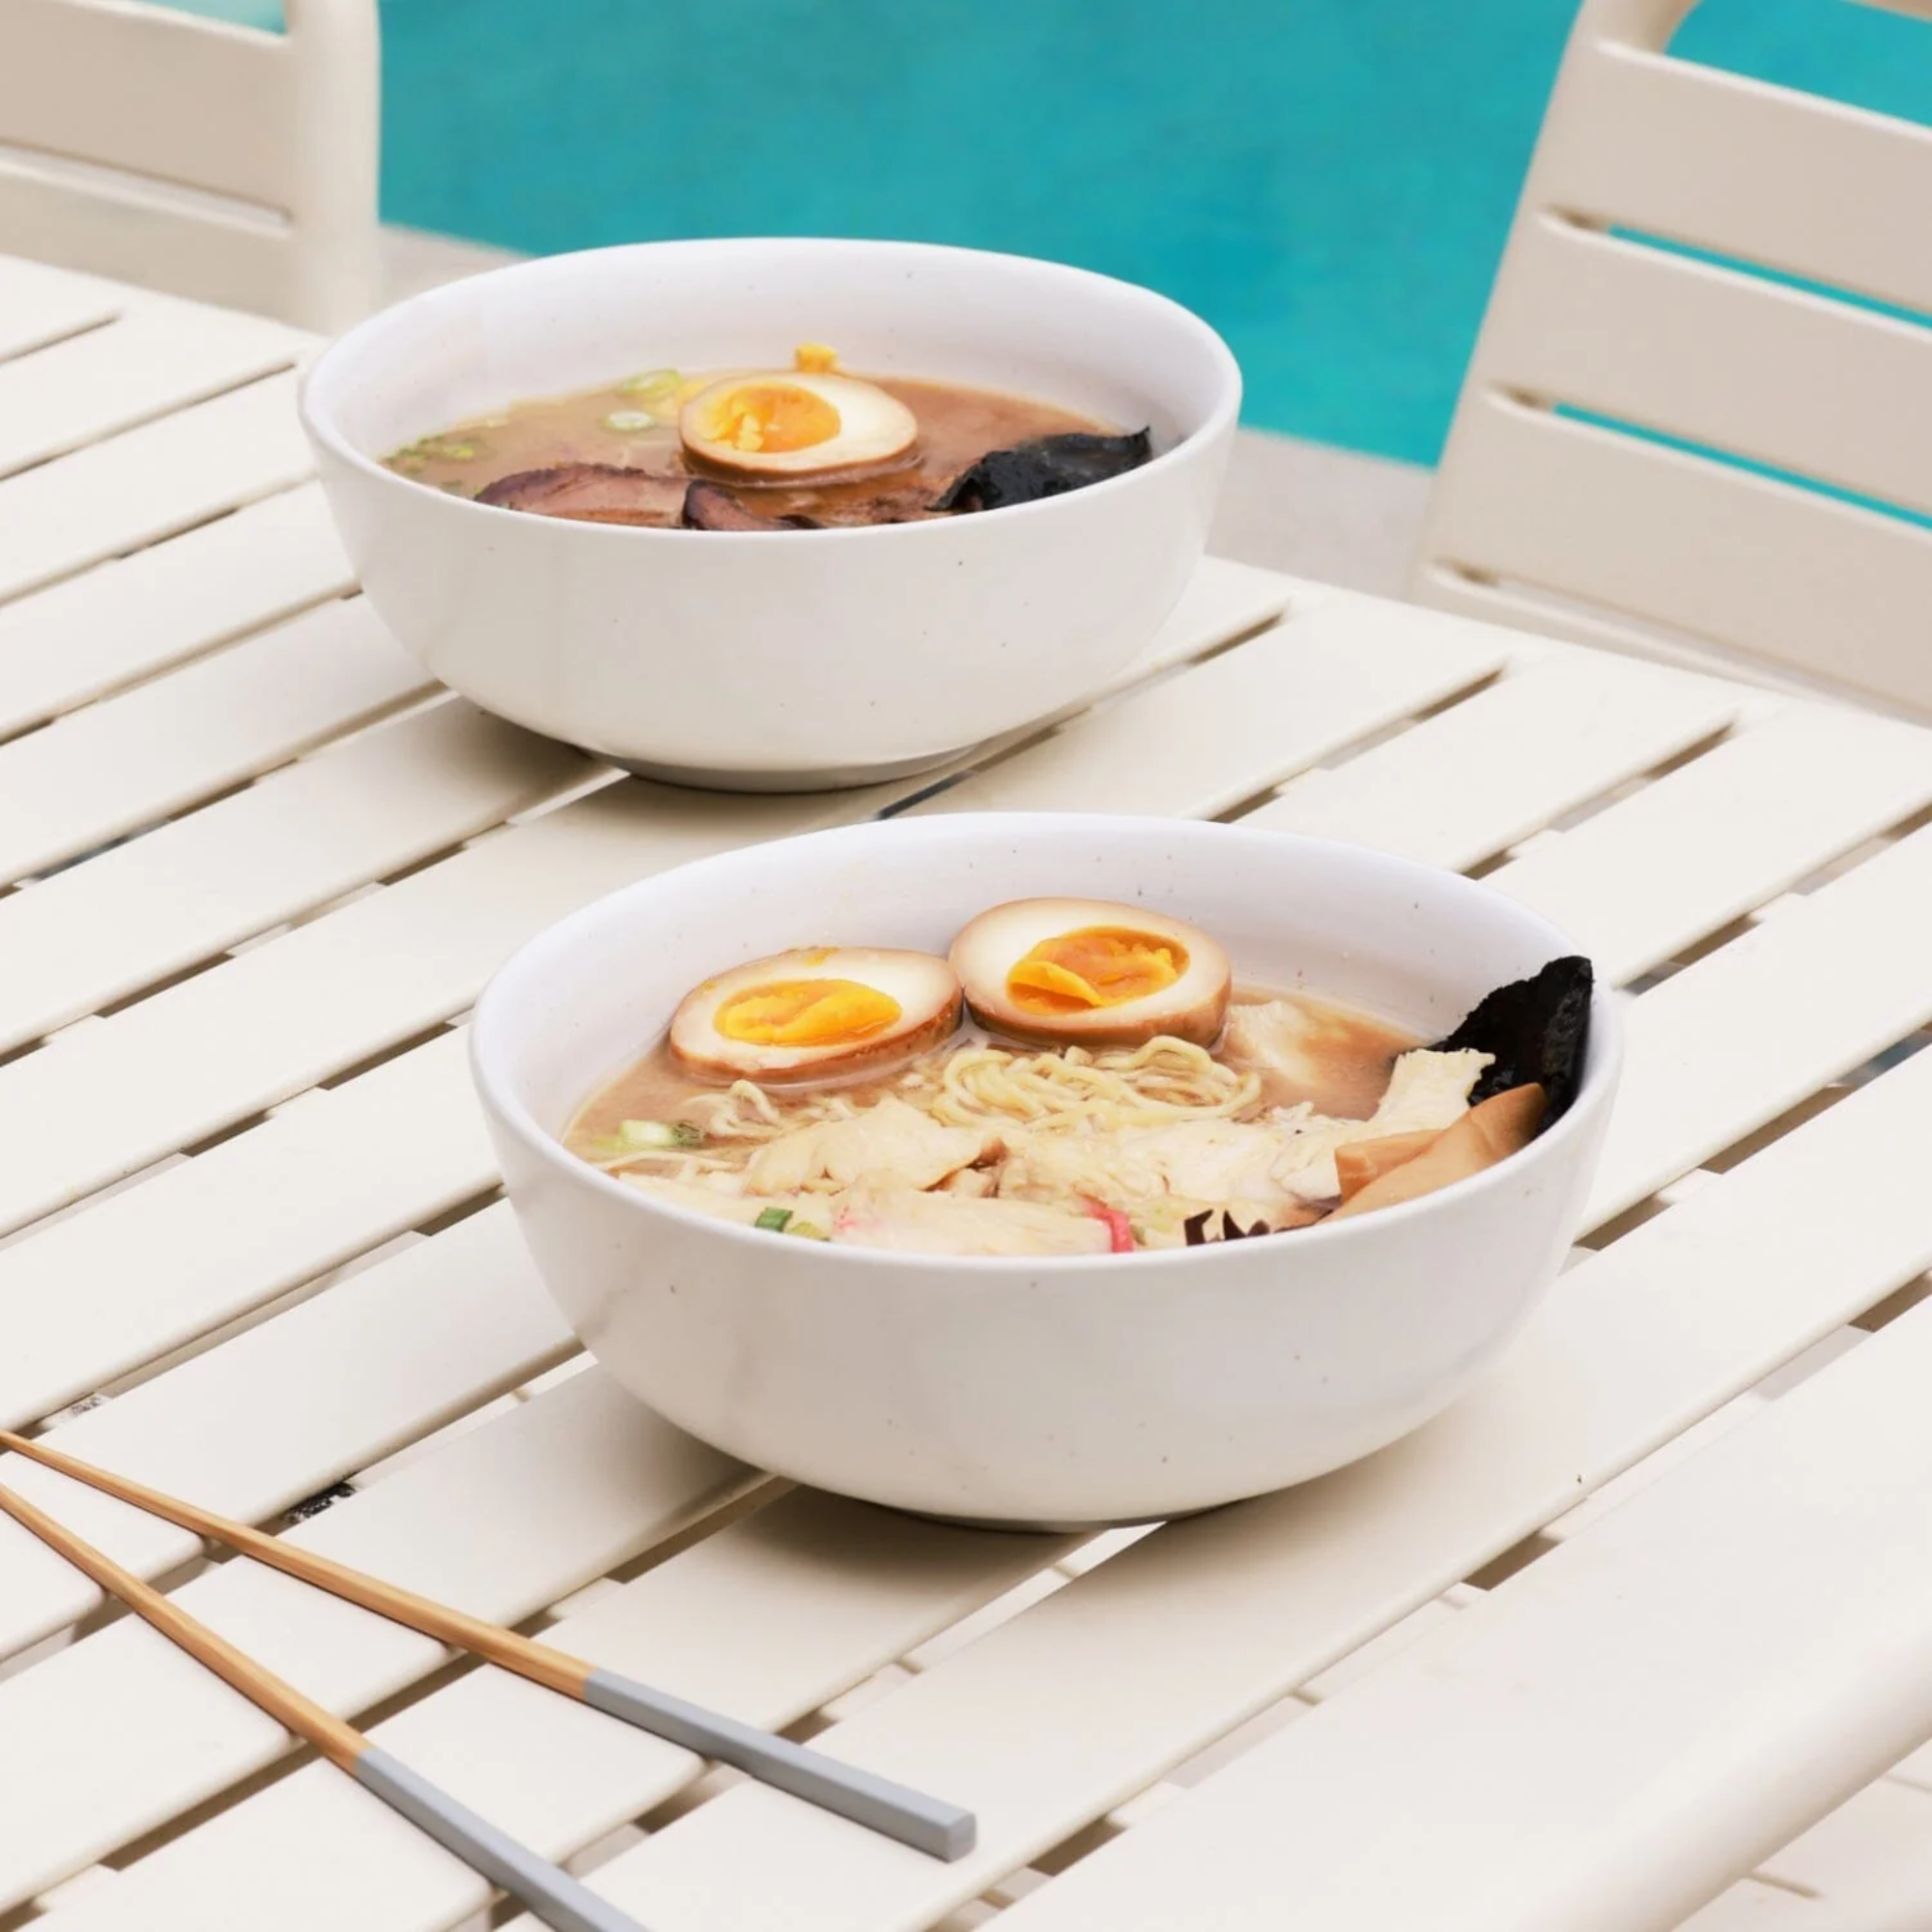 Fable Ramen Bowls - Speckled White